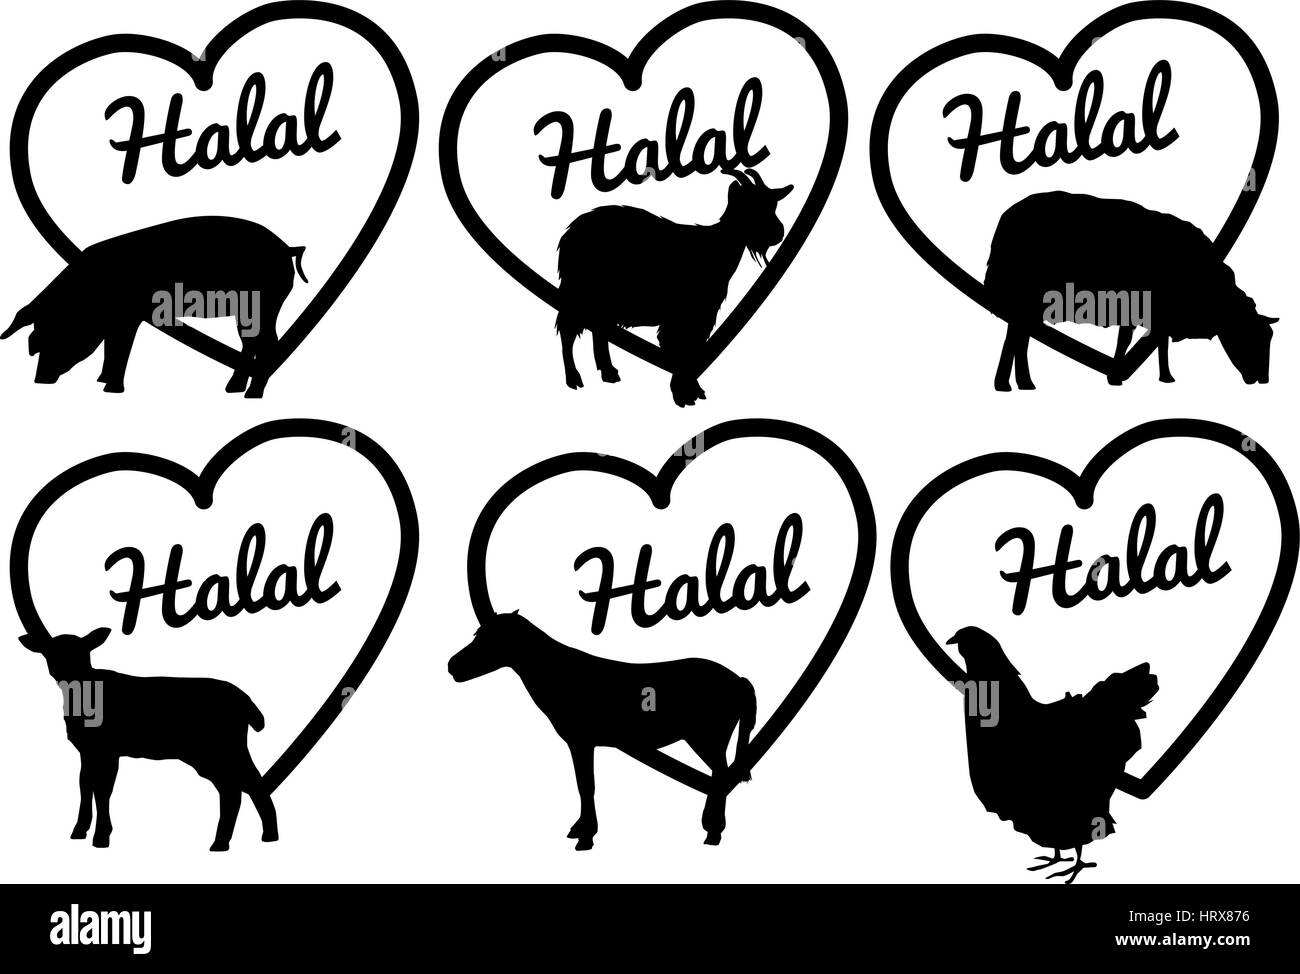 halal meat including beef, chicken, lamb and goat Stock Vector